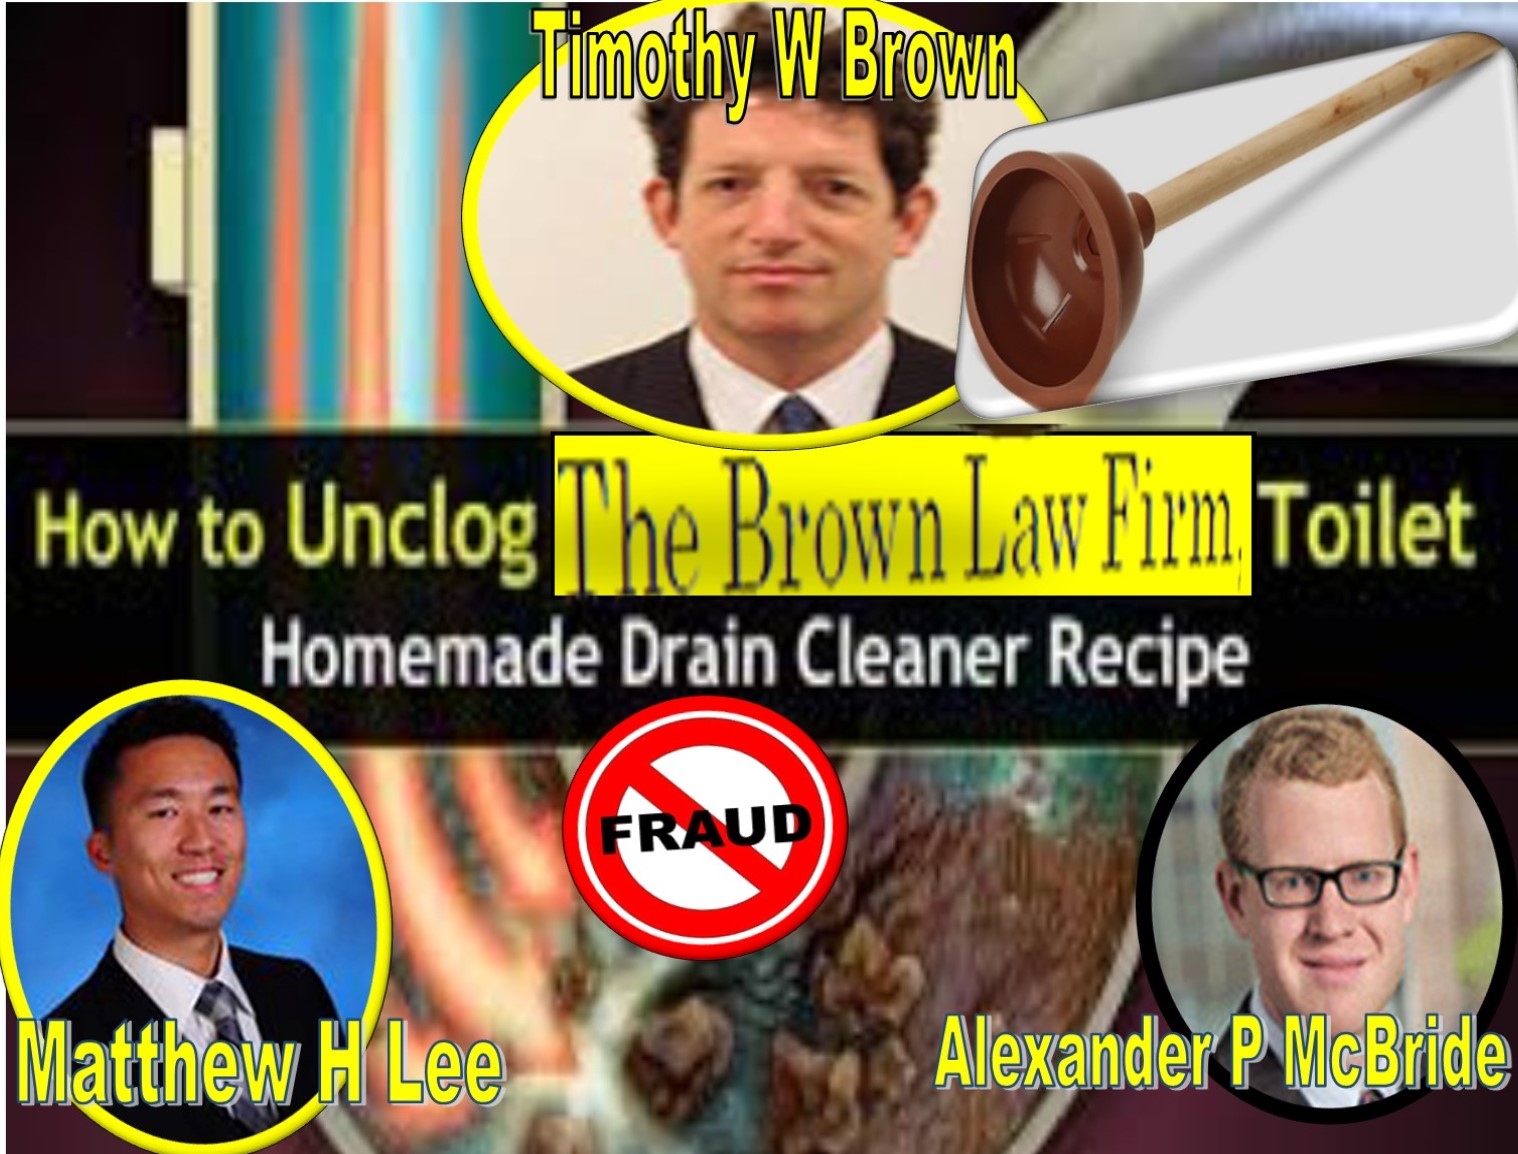 Timothy W Brown, The Brown Law Firm, The Obscure Oyster Bay Lawyers Are Total Frauds